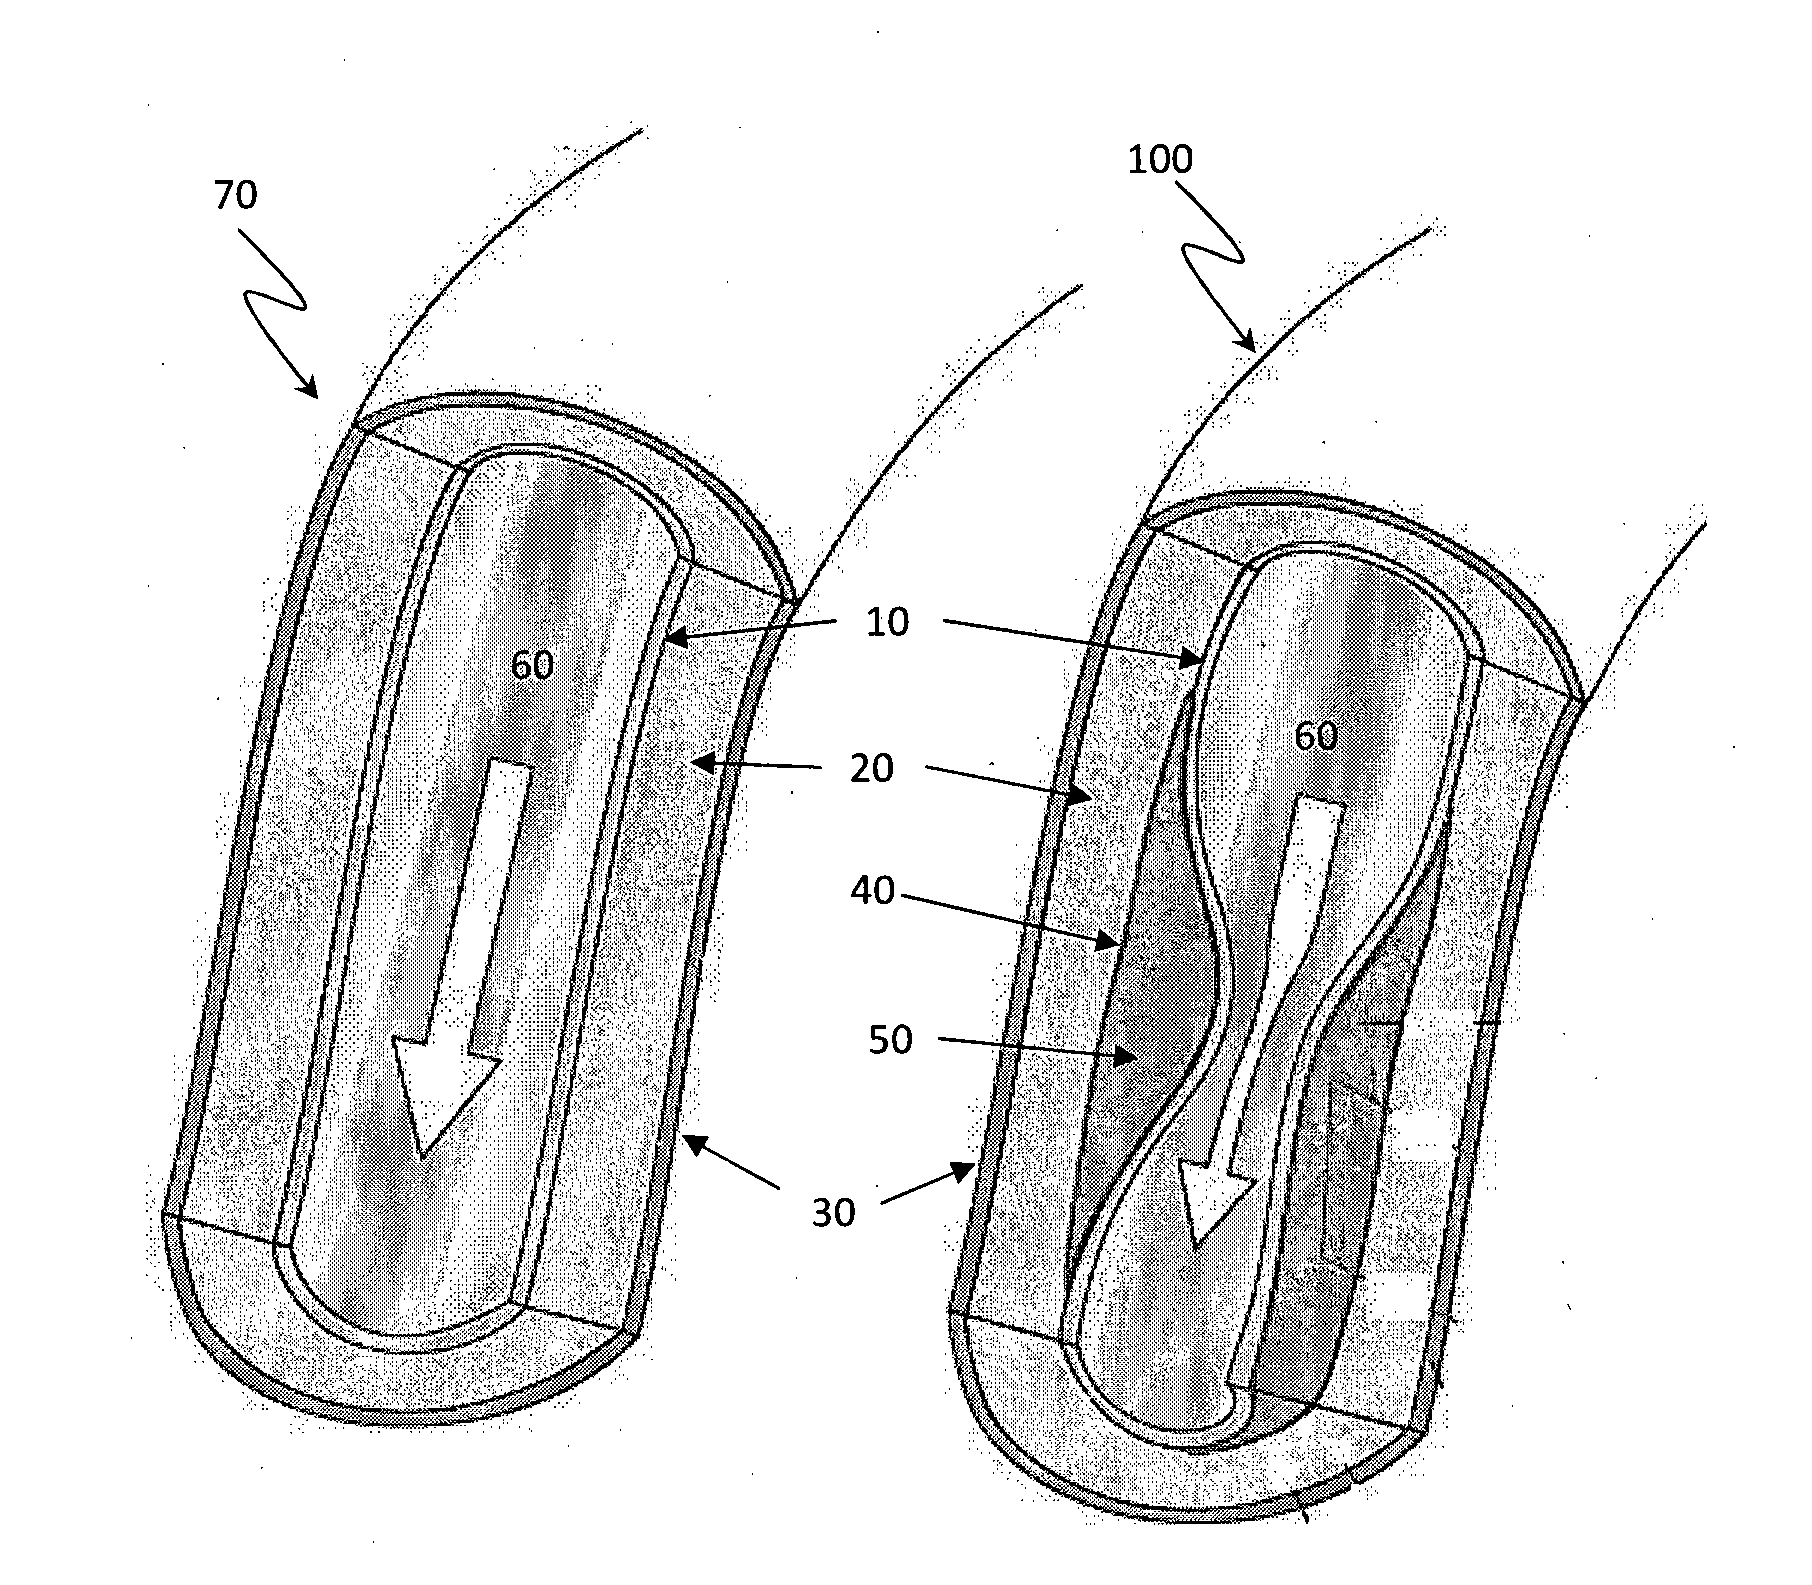 Method and apparatus for eliminating atherosclerosis from a region of the arterial tree